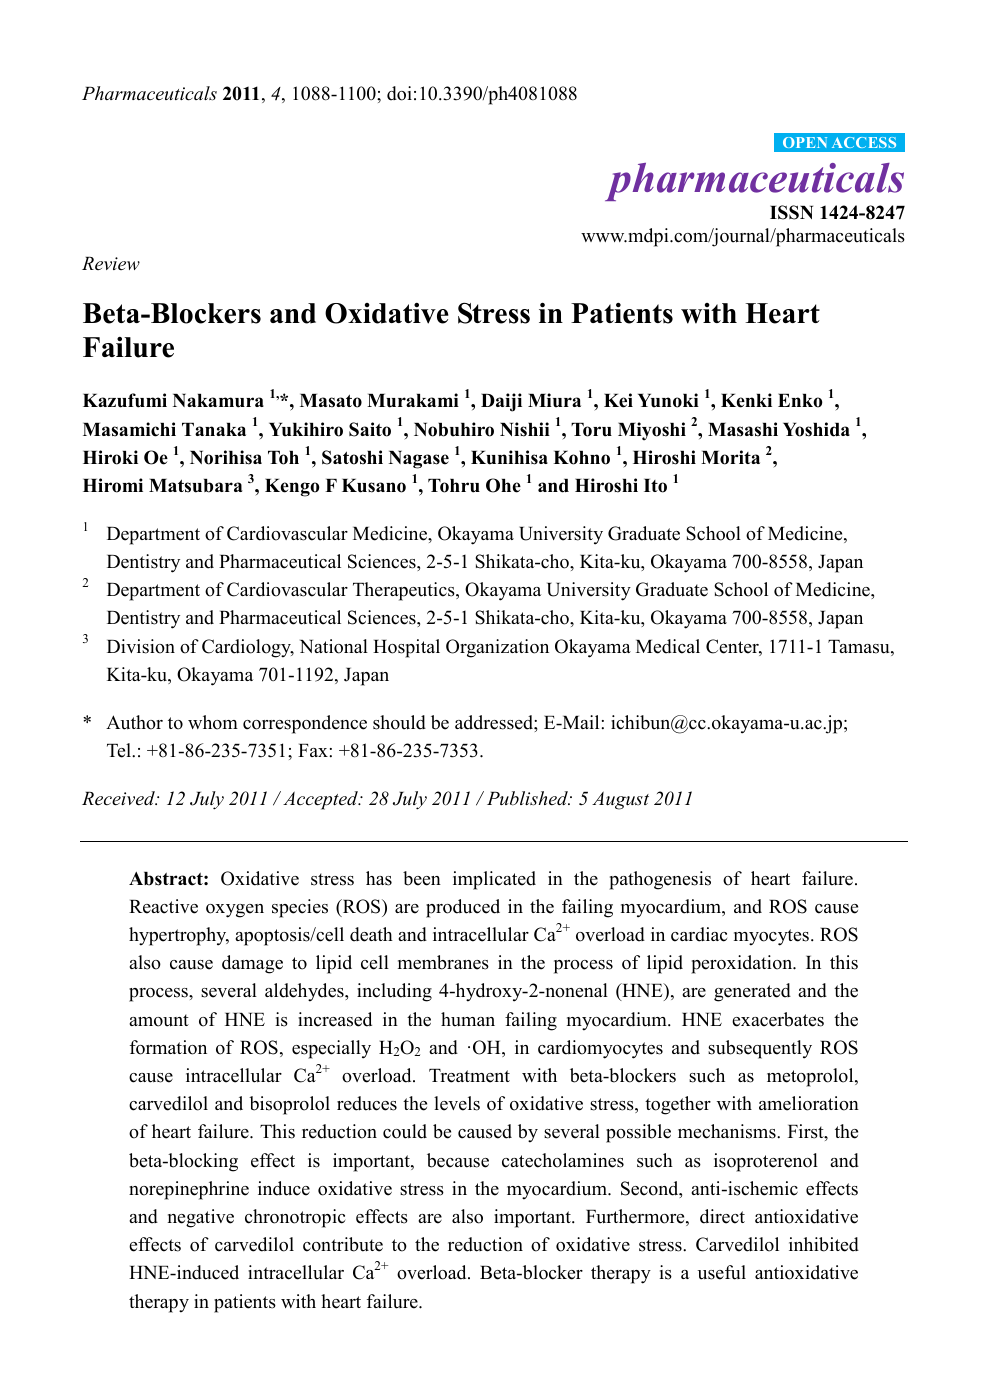 Beta Blockers And Oxidative Stress In Patients With Heart Failure Topic Of Research Paper In Basic Medicine Download Scholarly Article Pdf And Read For Free On Cyberleninka Open Science Hub